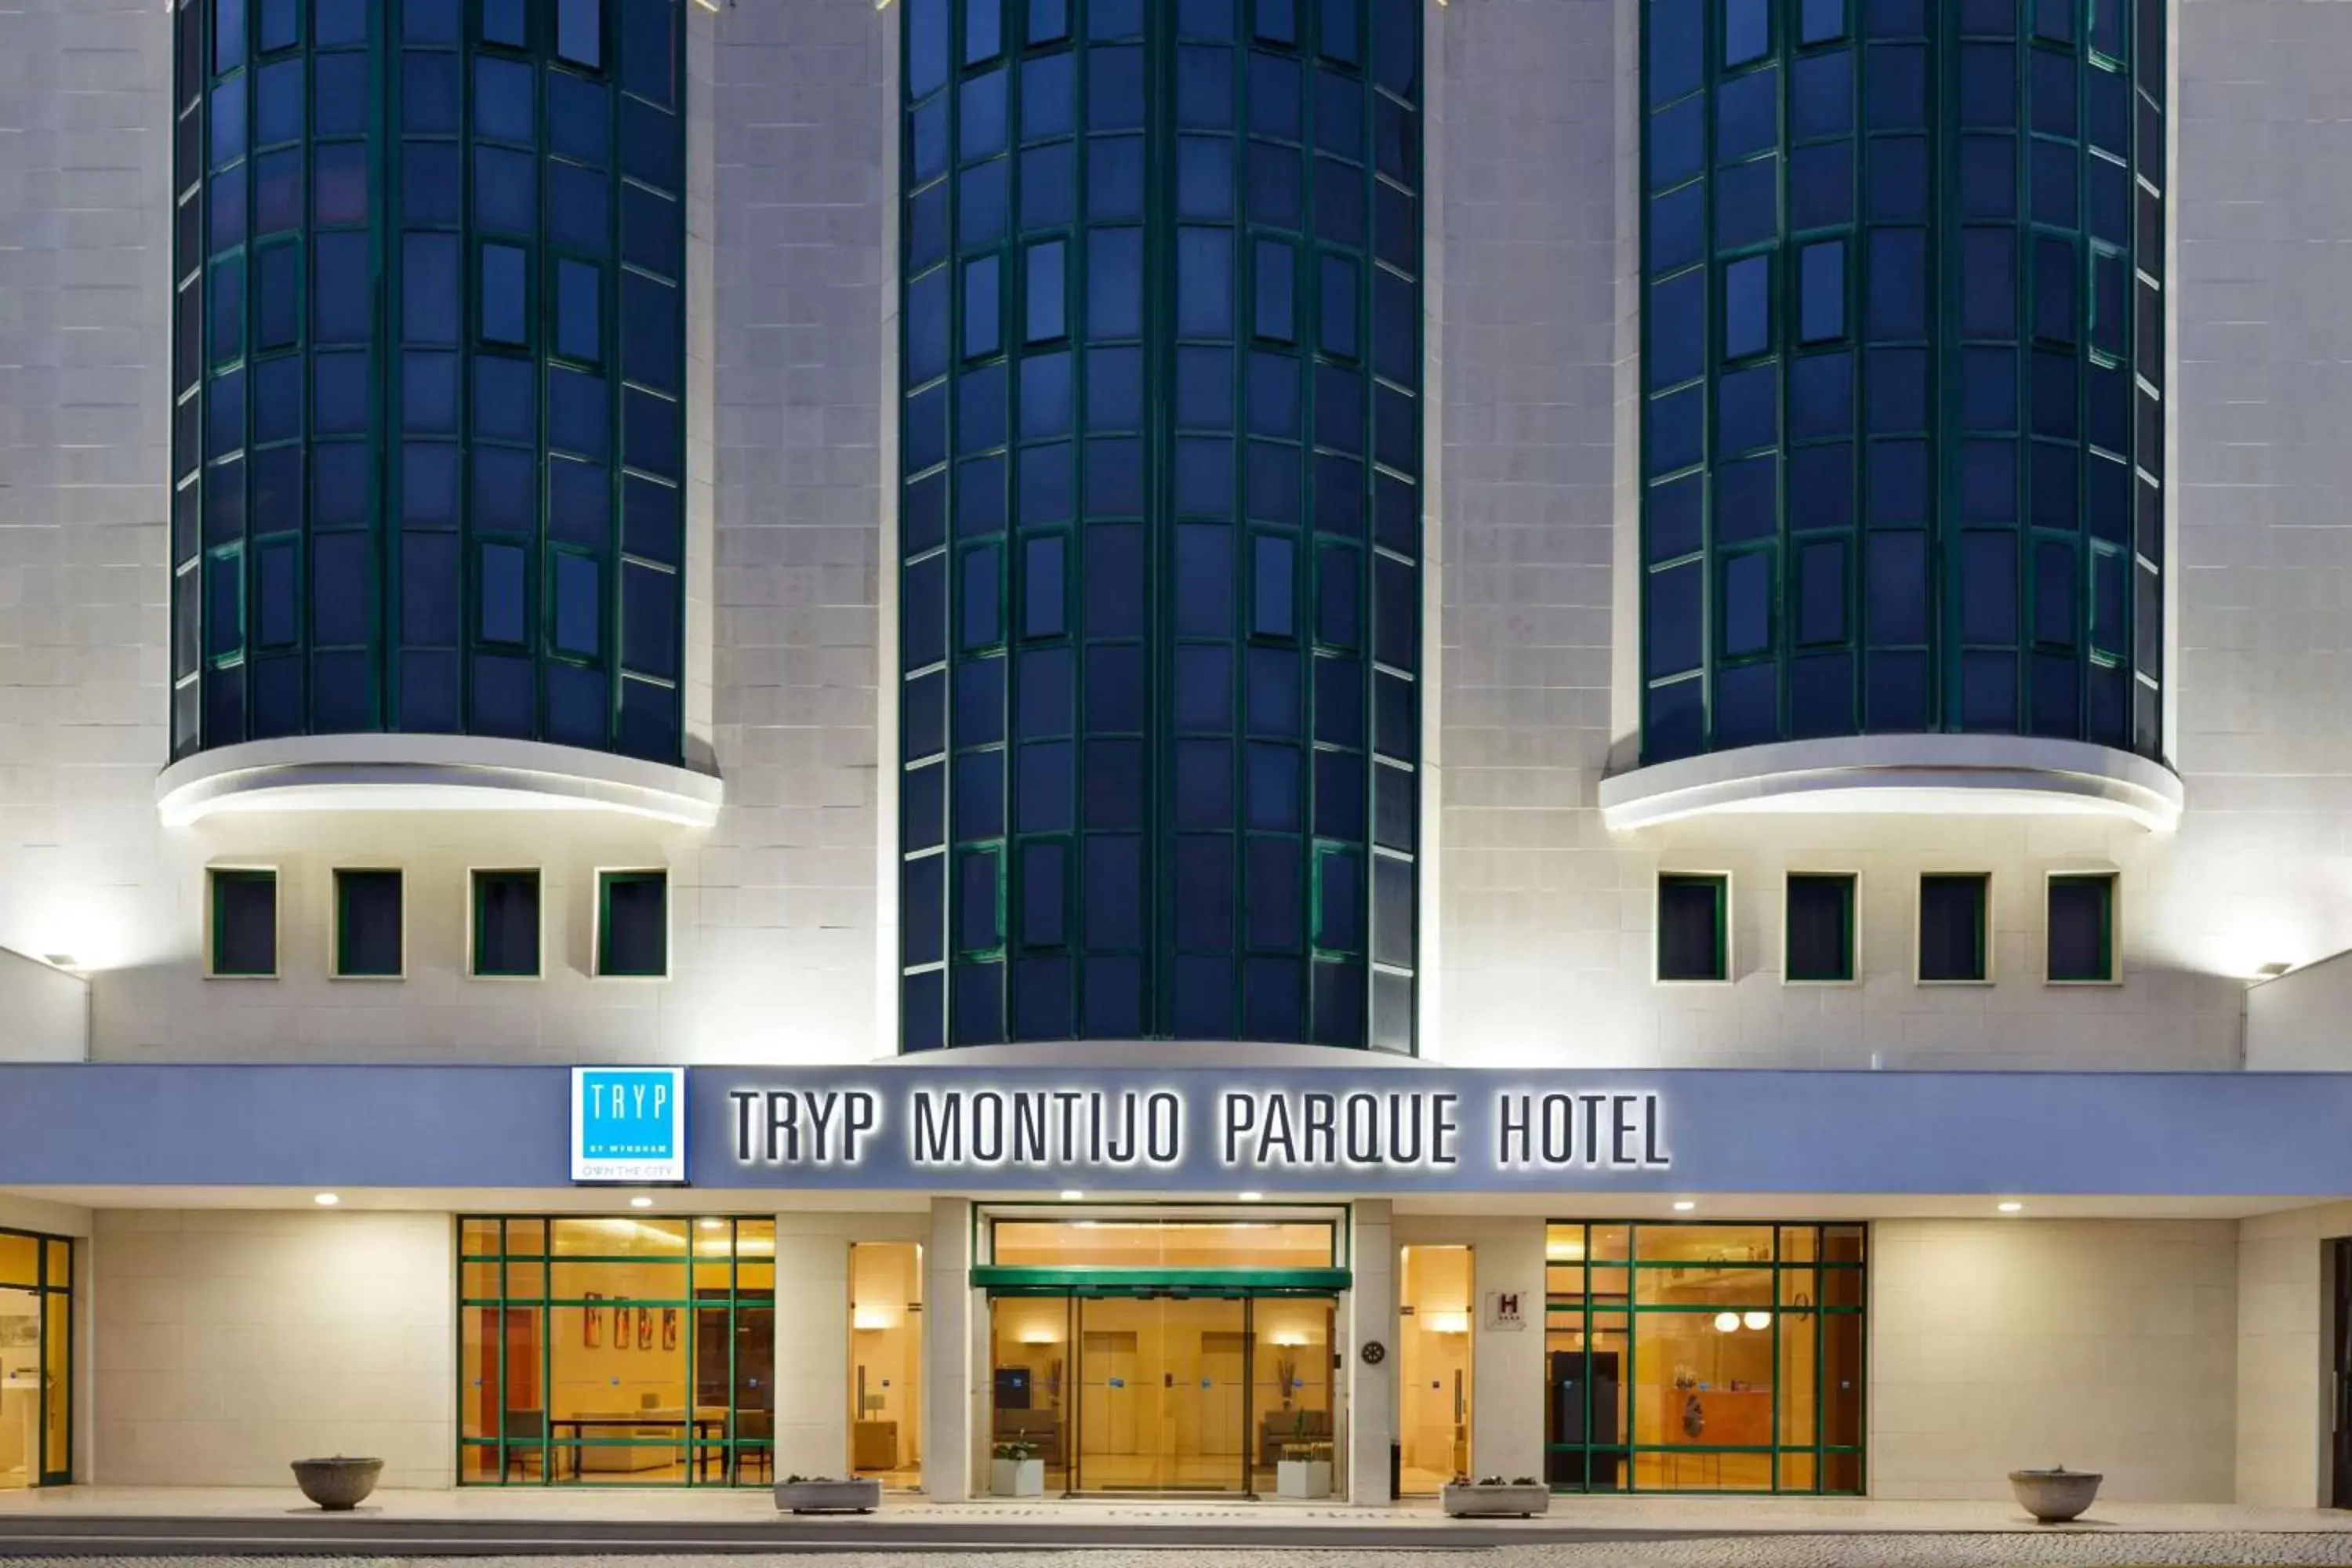 Property Building in TRYP by Wyndham Montijo Parque Hotel